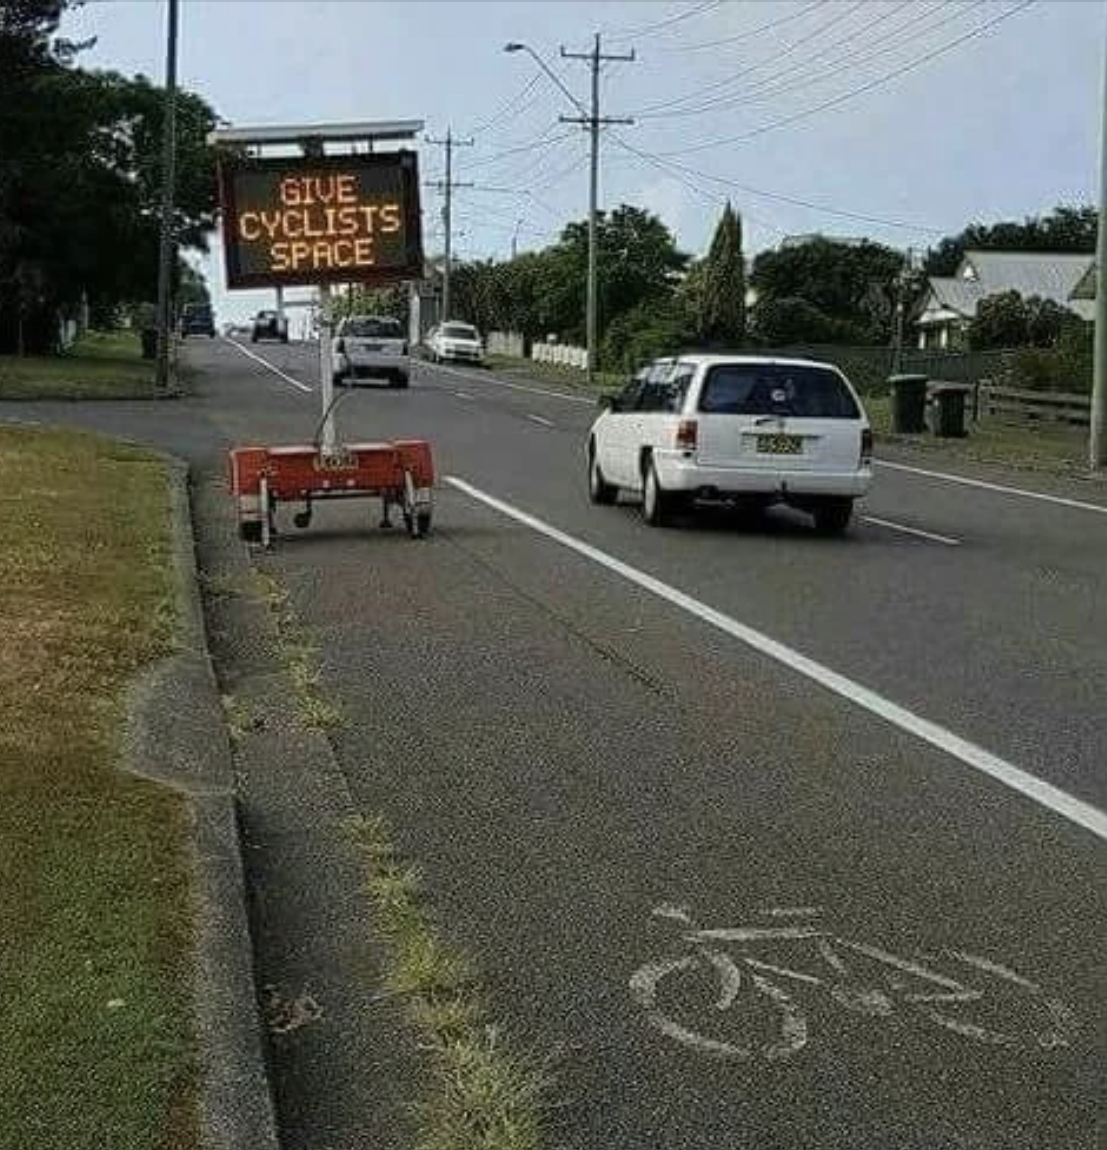 Electronic roadside sign reads &quot;GIVE CYCLISTS SPACE&quot; next to a bike lane with a car approaching